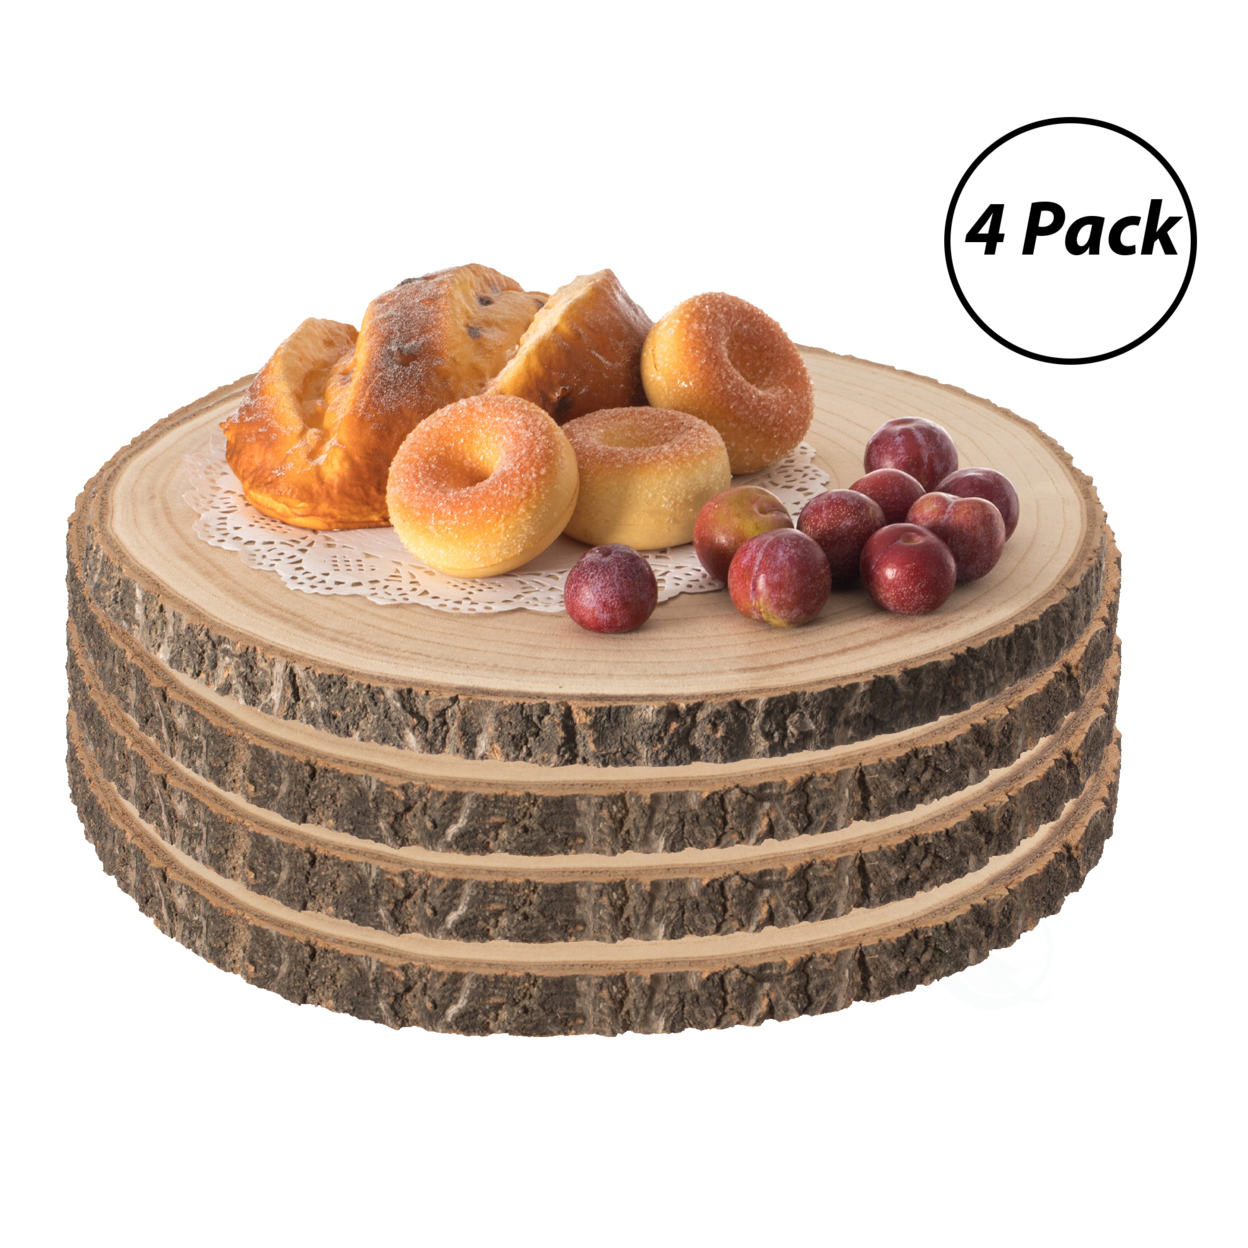 Home Decor Natural Wooden Bark Slice Tray Large Rustic Table Charger Centerpiece, Set Of 4 - 12